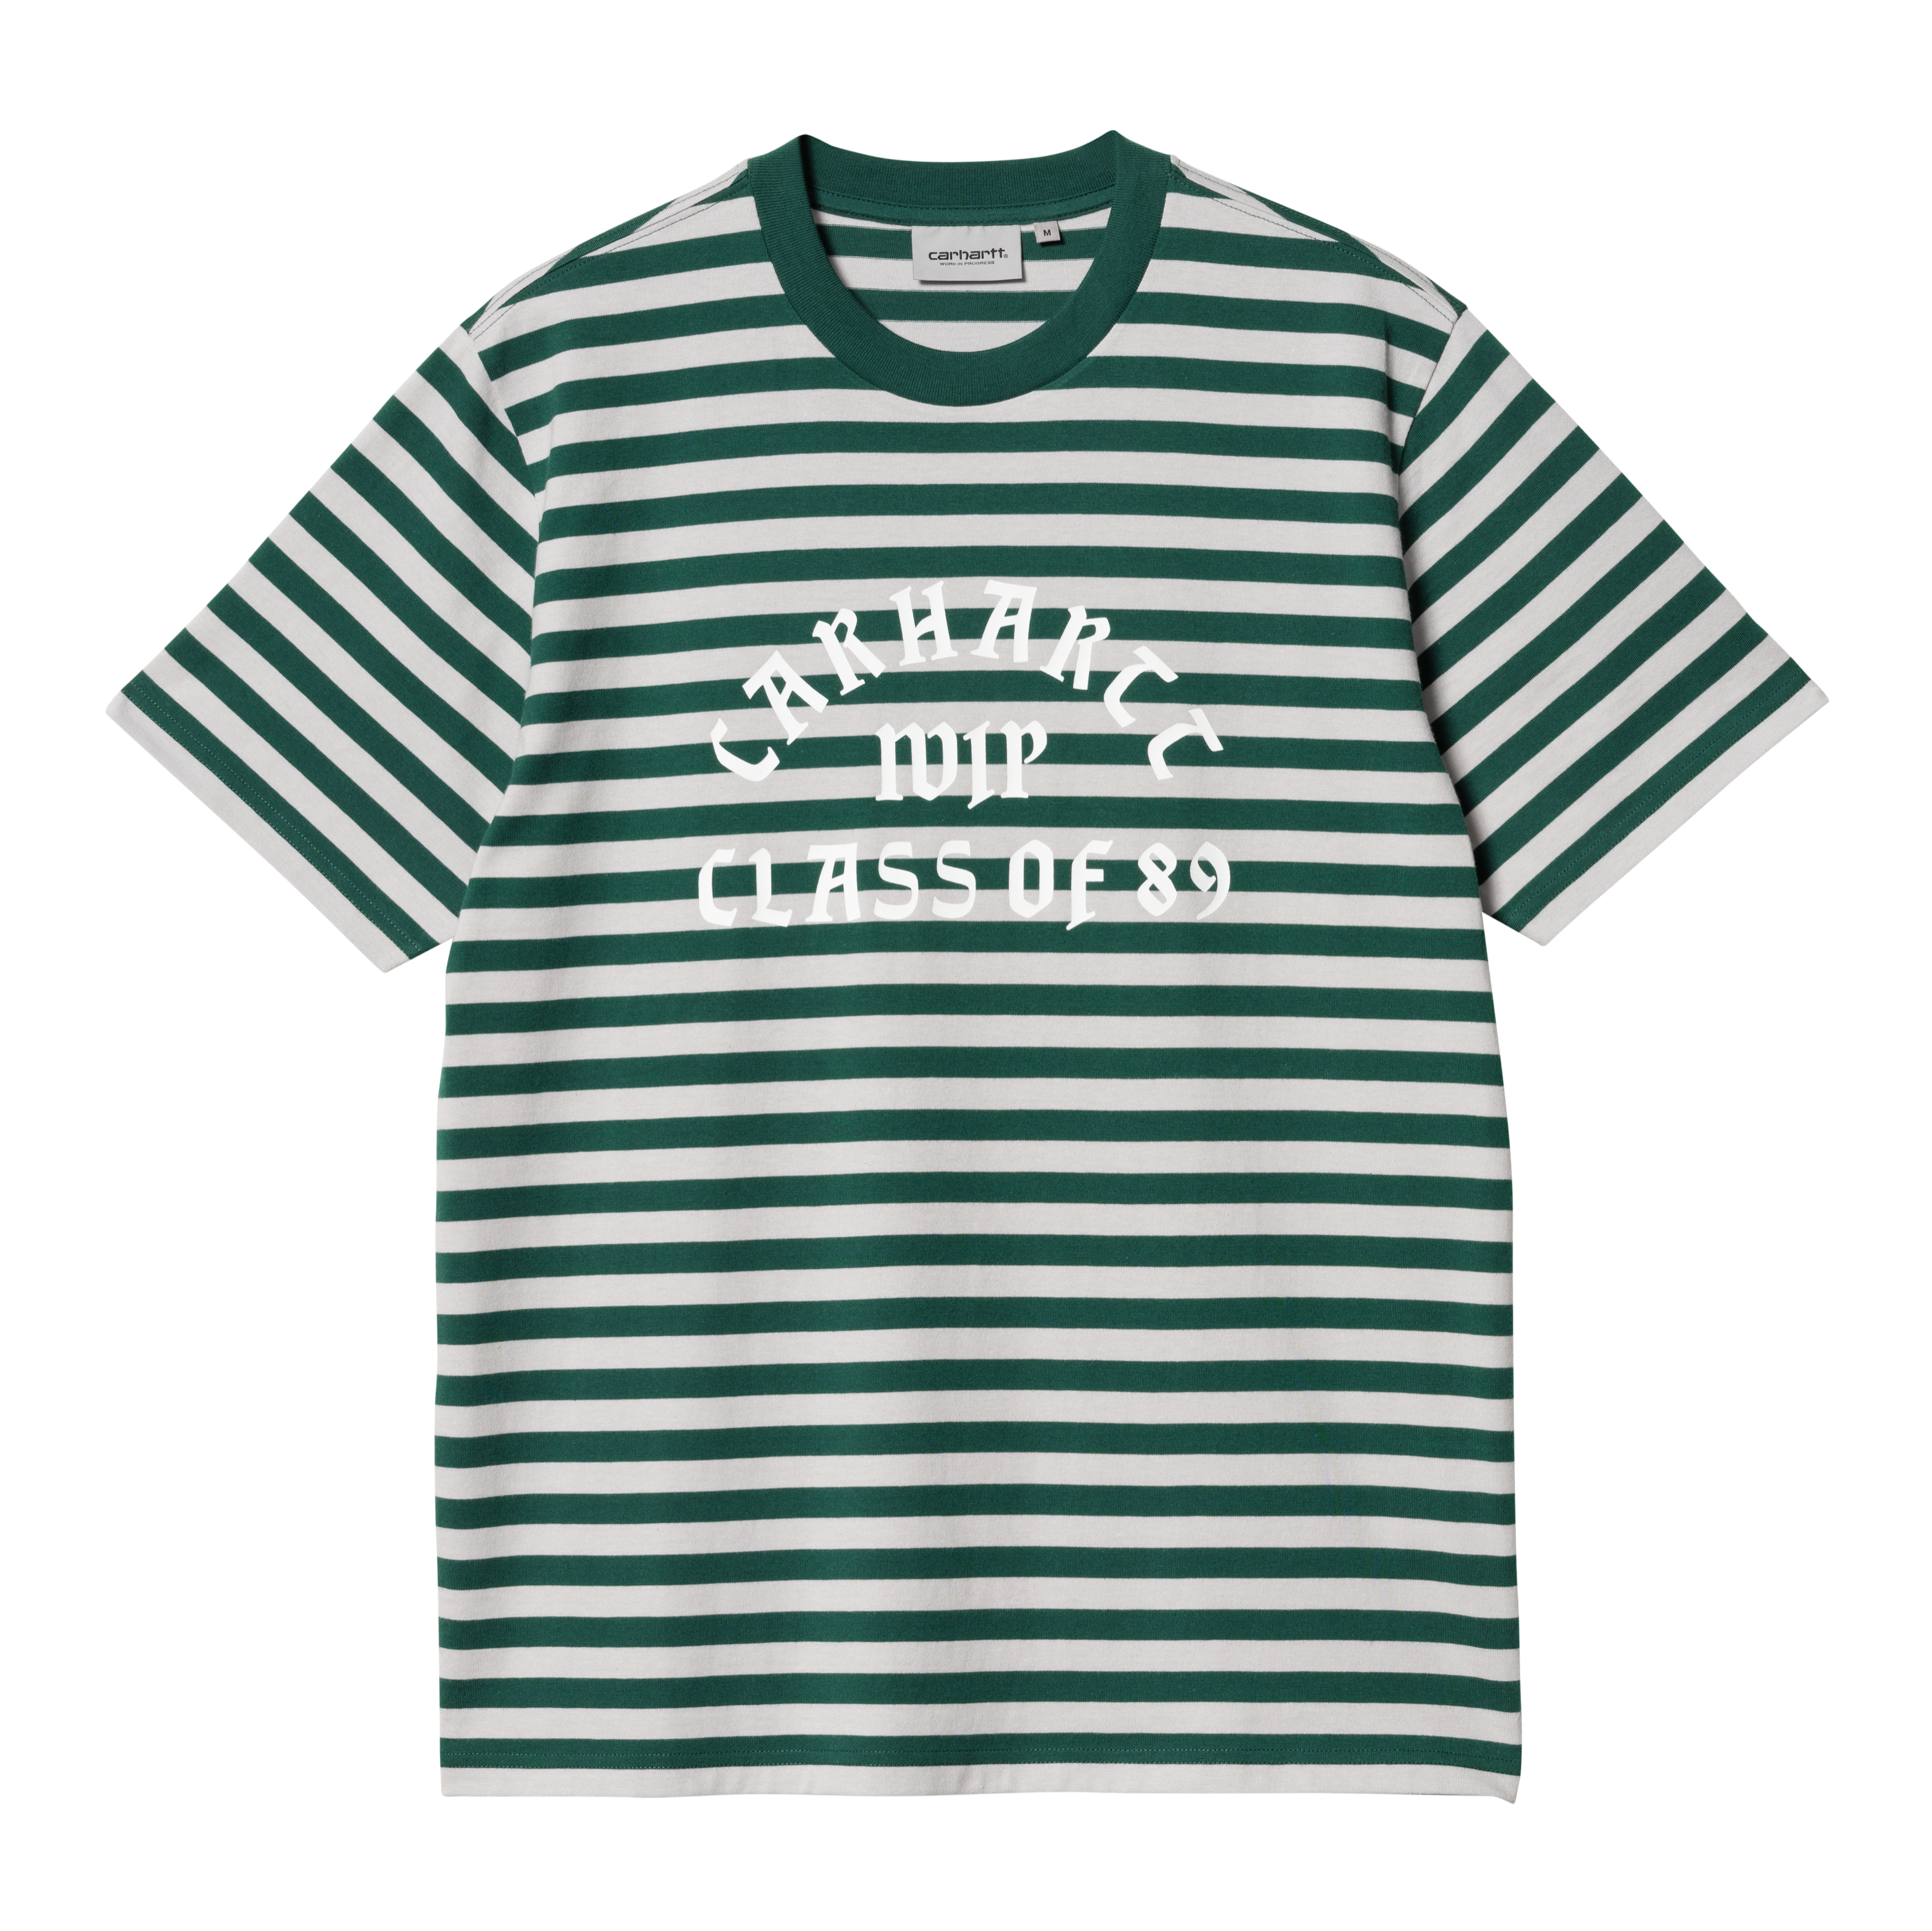 Carhartt WIP Short Sleeve Scotty Athletic T-Shirt in Green